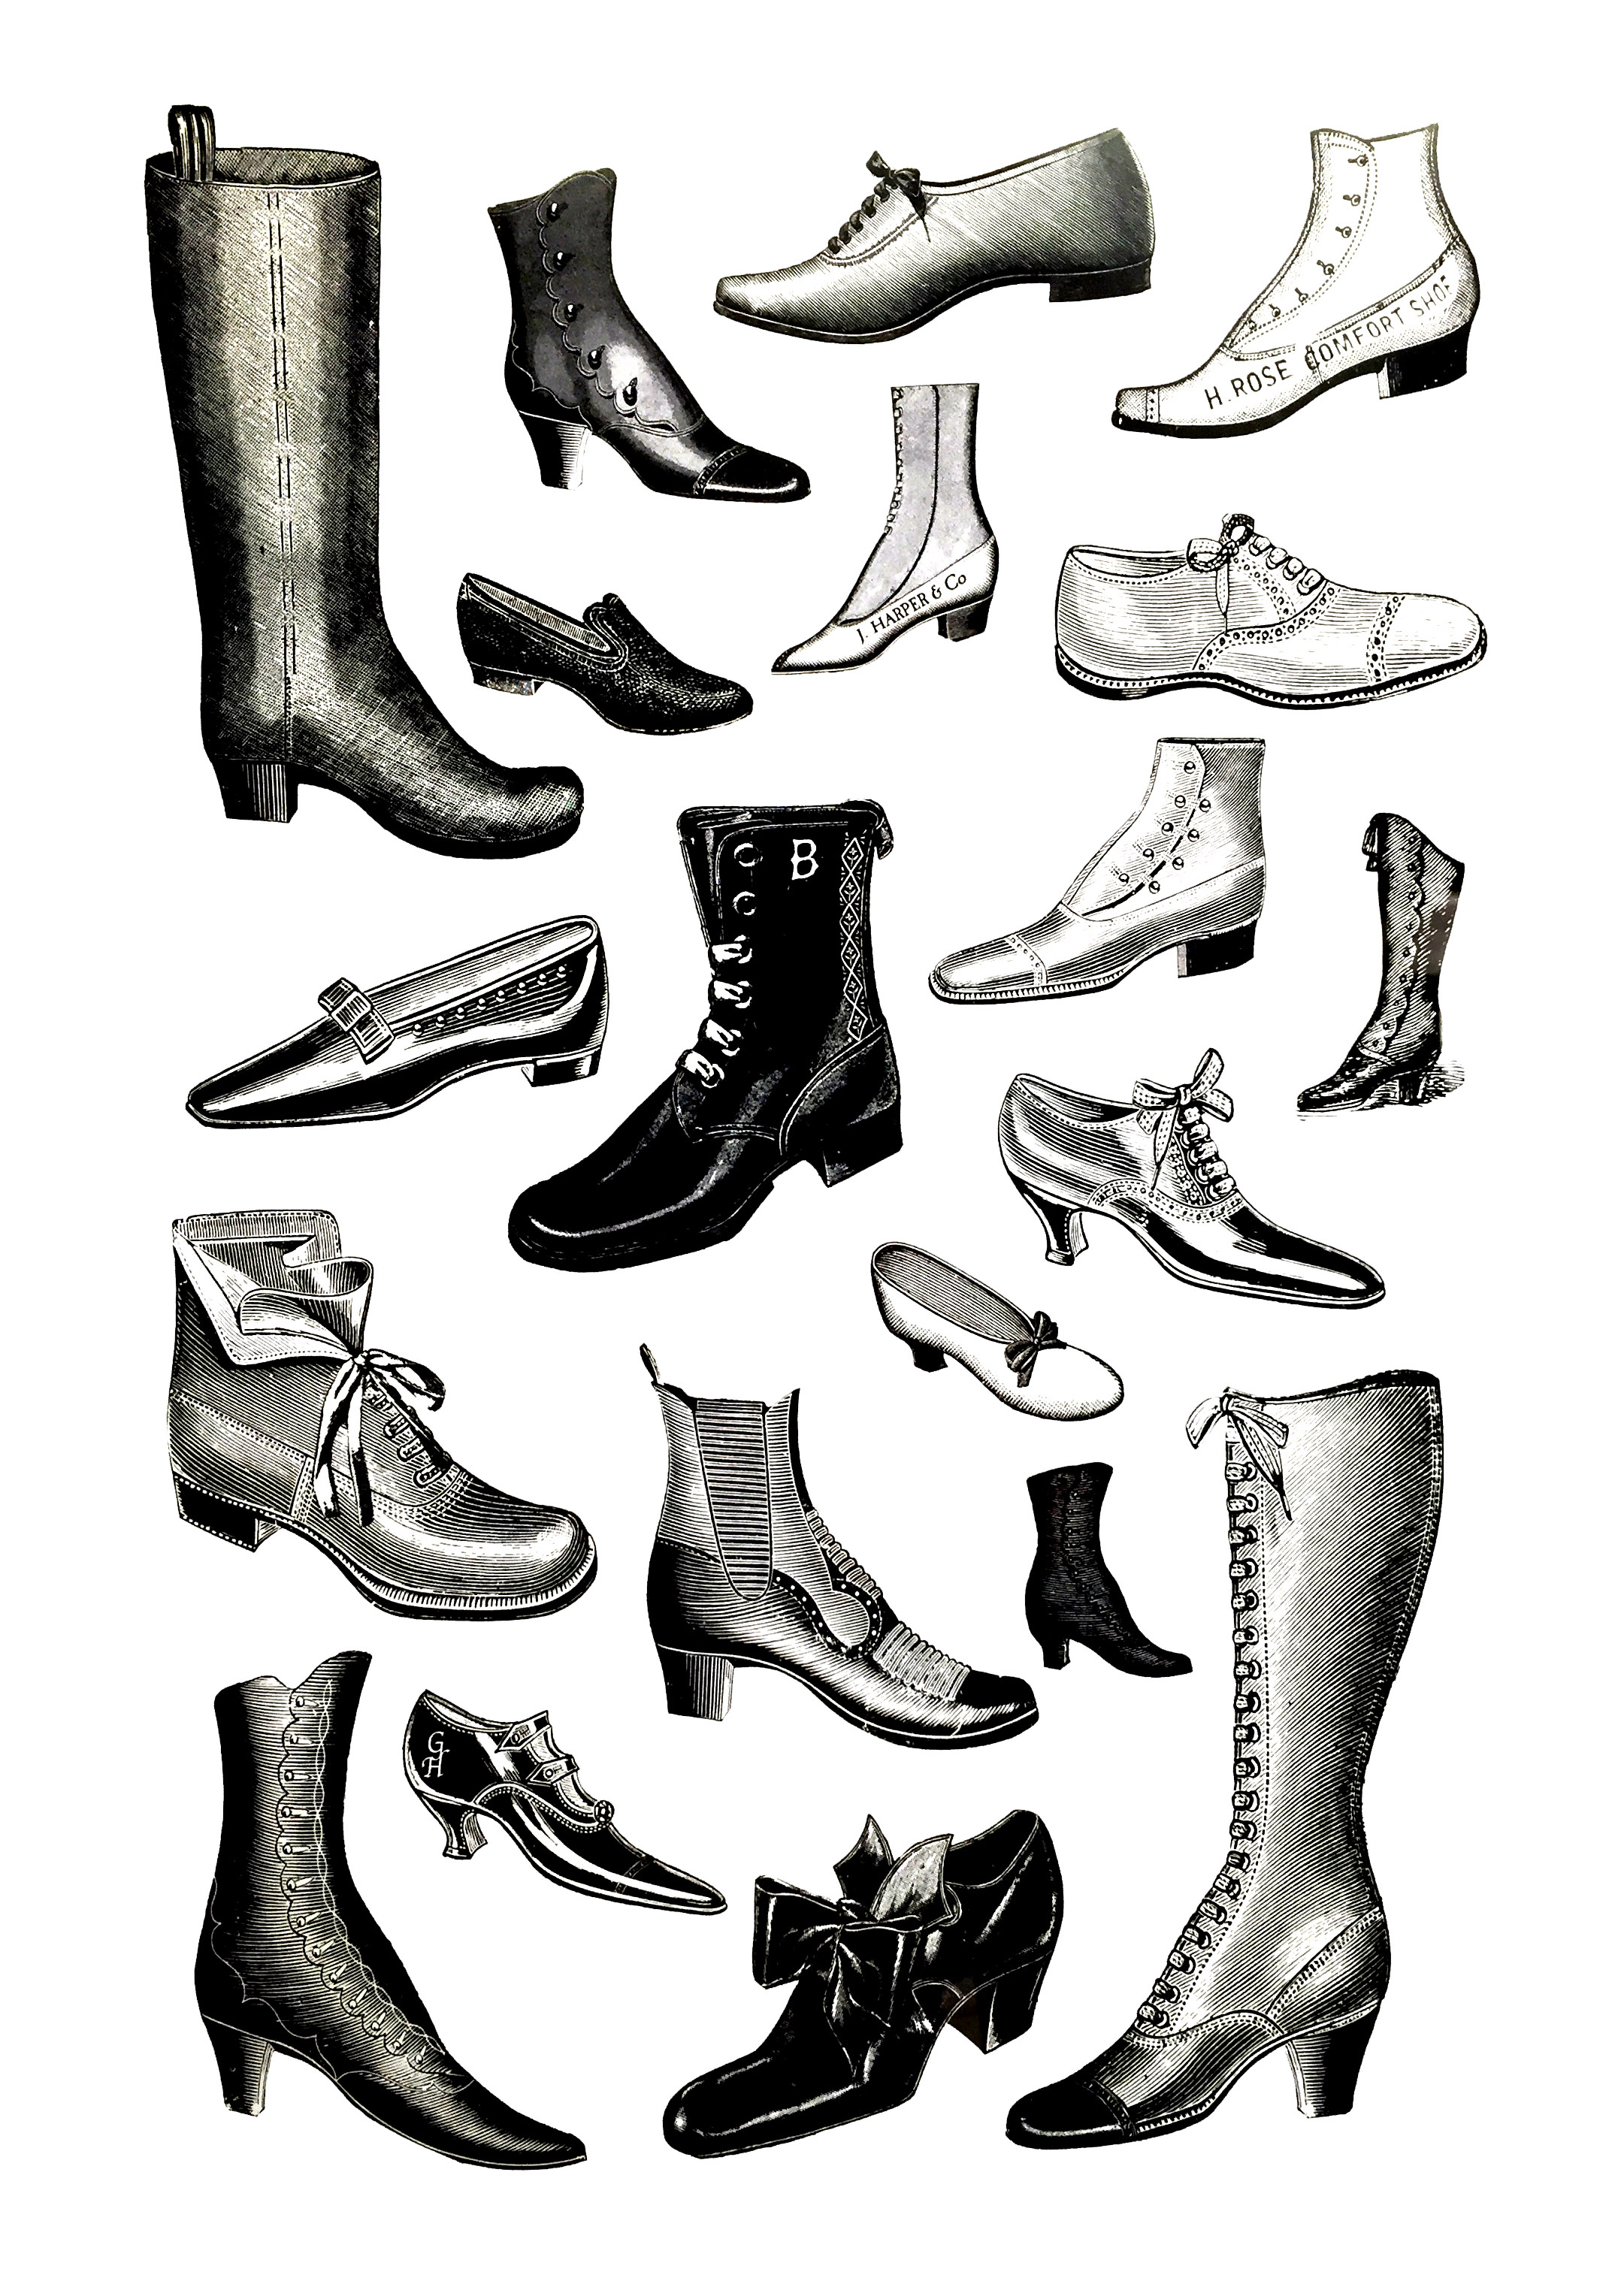 Different kind of shoes during the 19th century